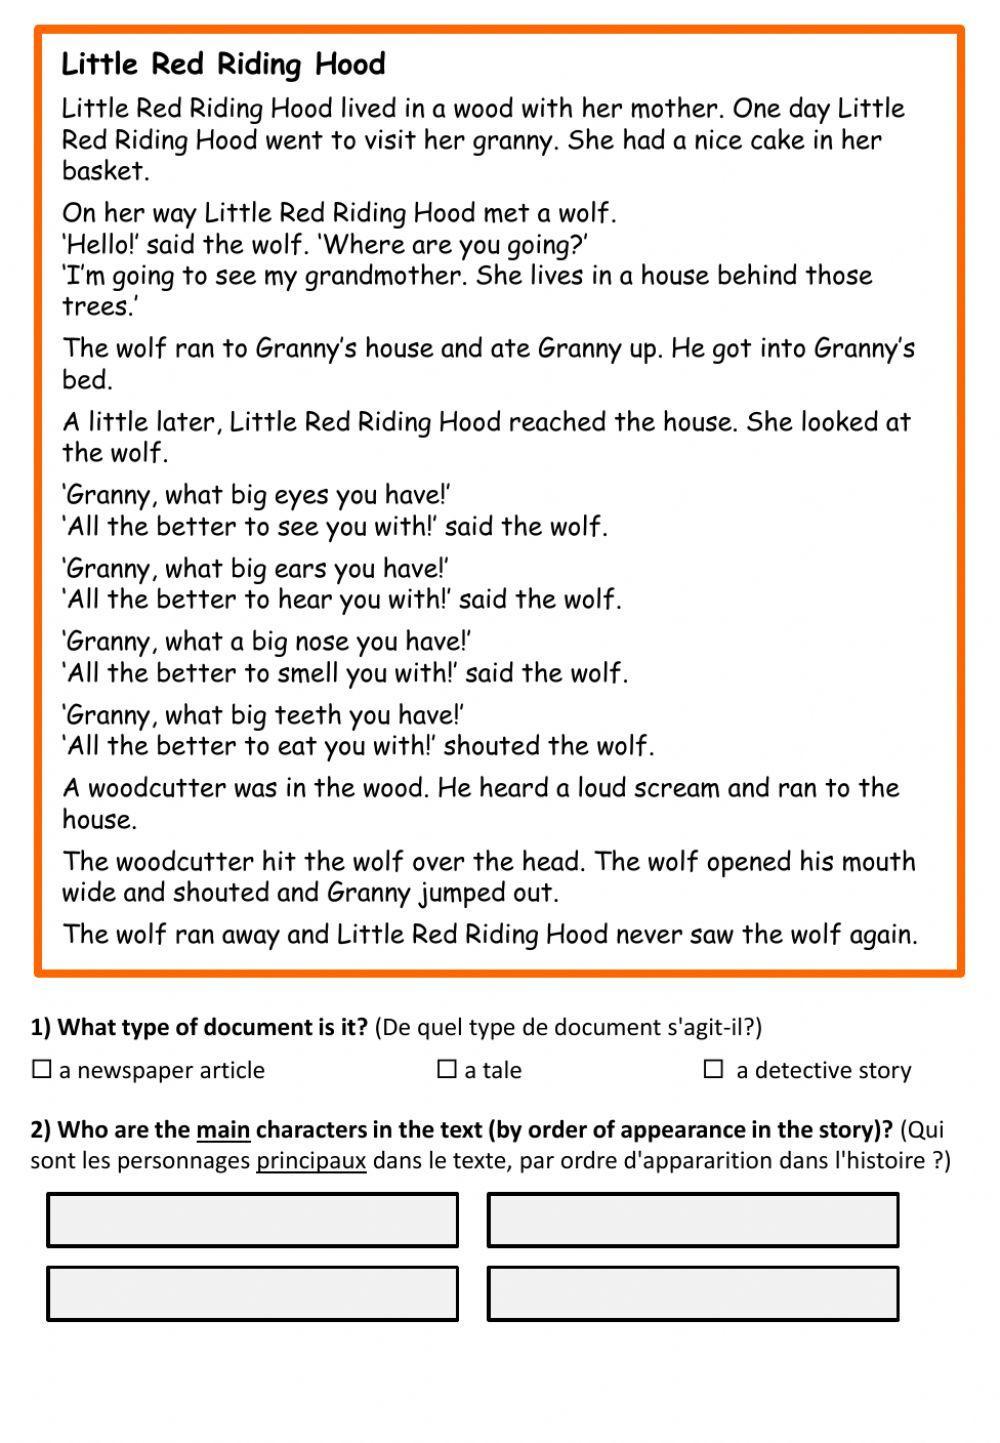 Little Red Riding Hood (reading comprehension)